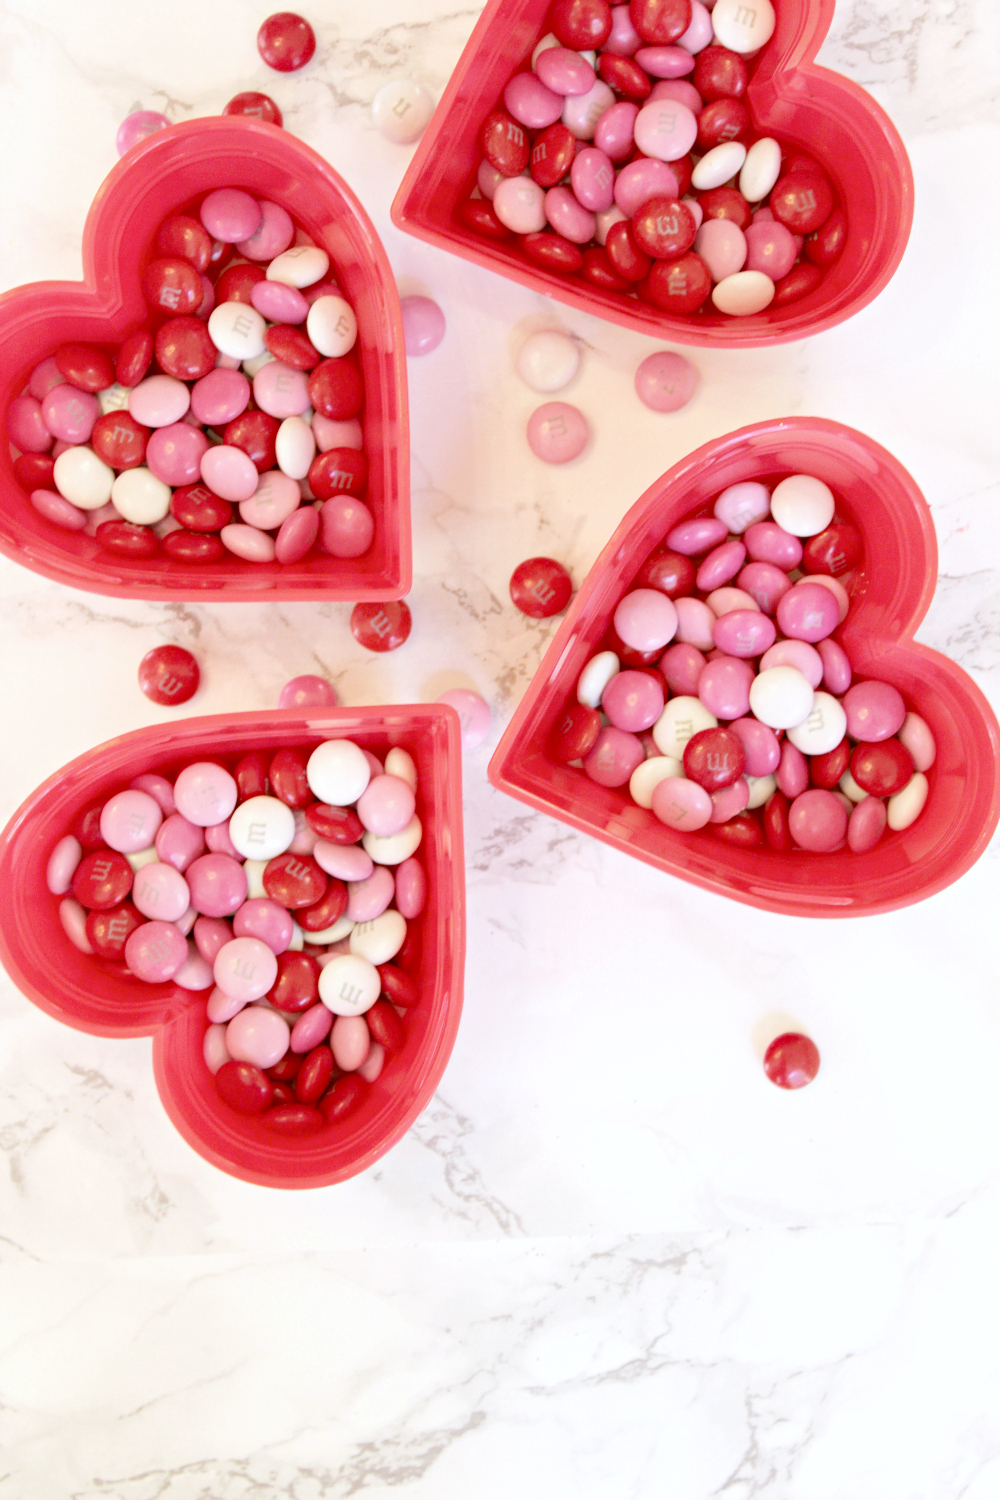 Edible gifts, like MY M&MS, are the best gifts, especially on Valentine's Day | Edible Gifts are the Best Gifts: Valentine's Day My M&Ms by blogger Stephanie Ziajka from Diary of a Debutante